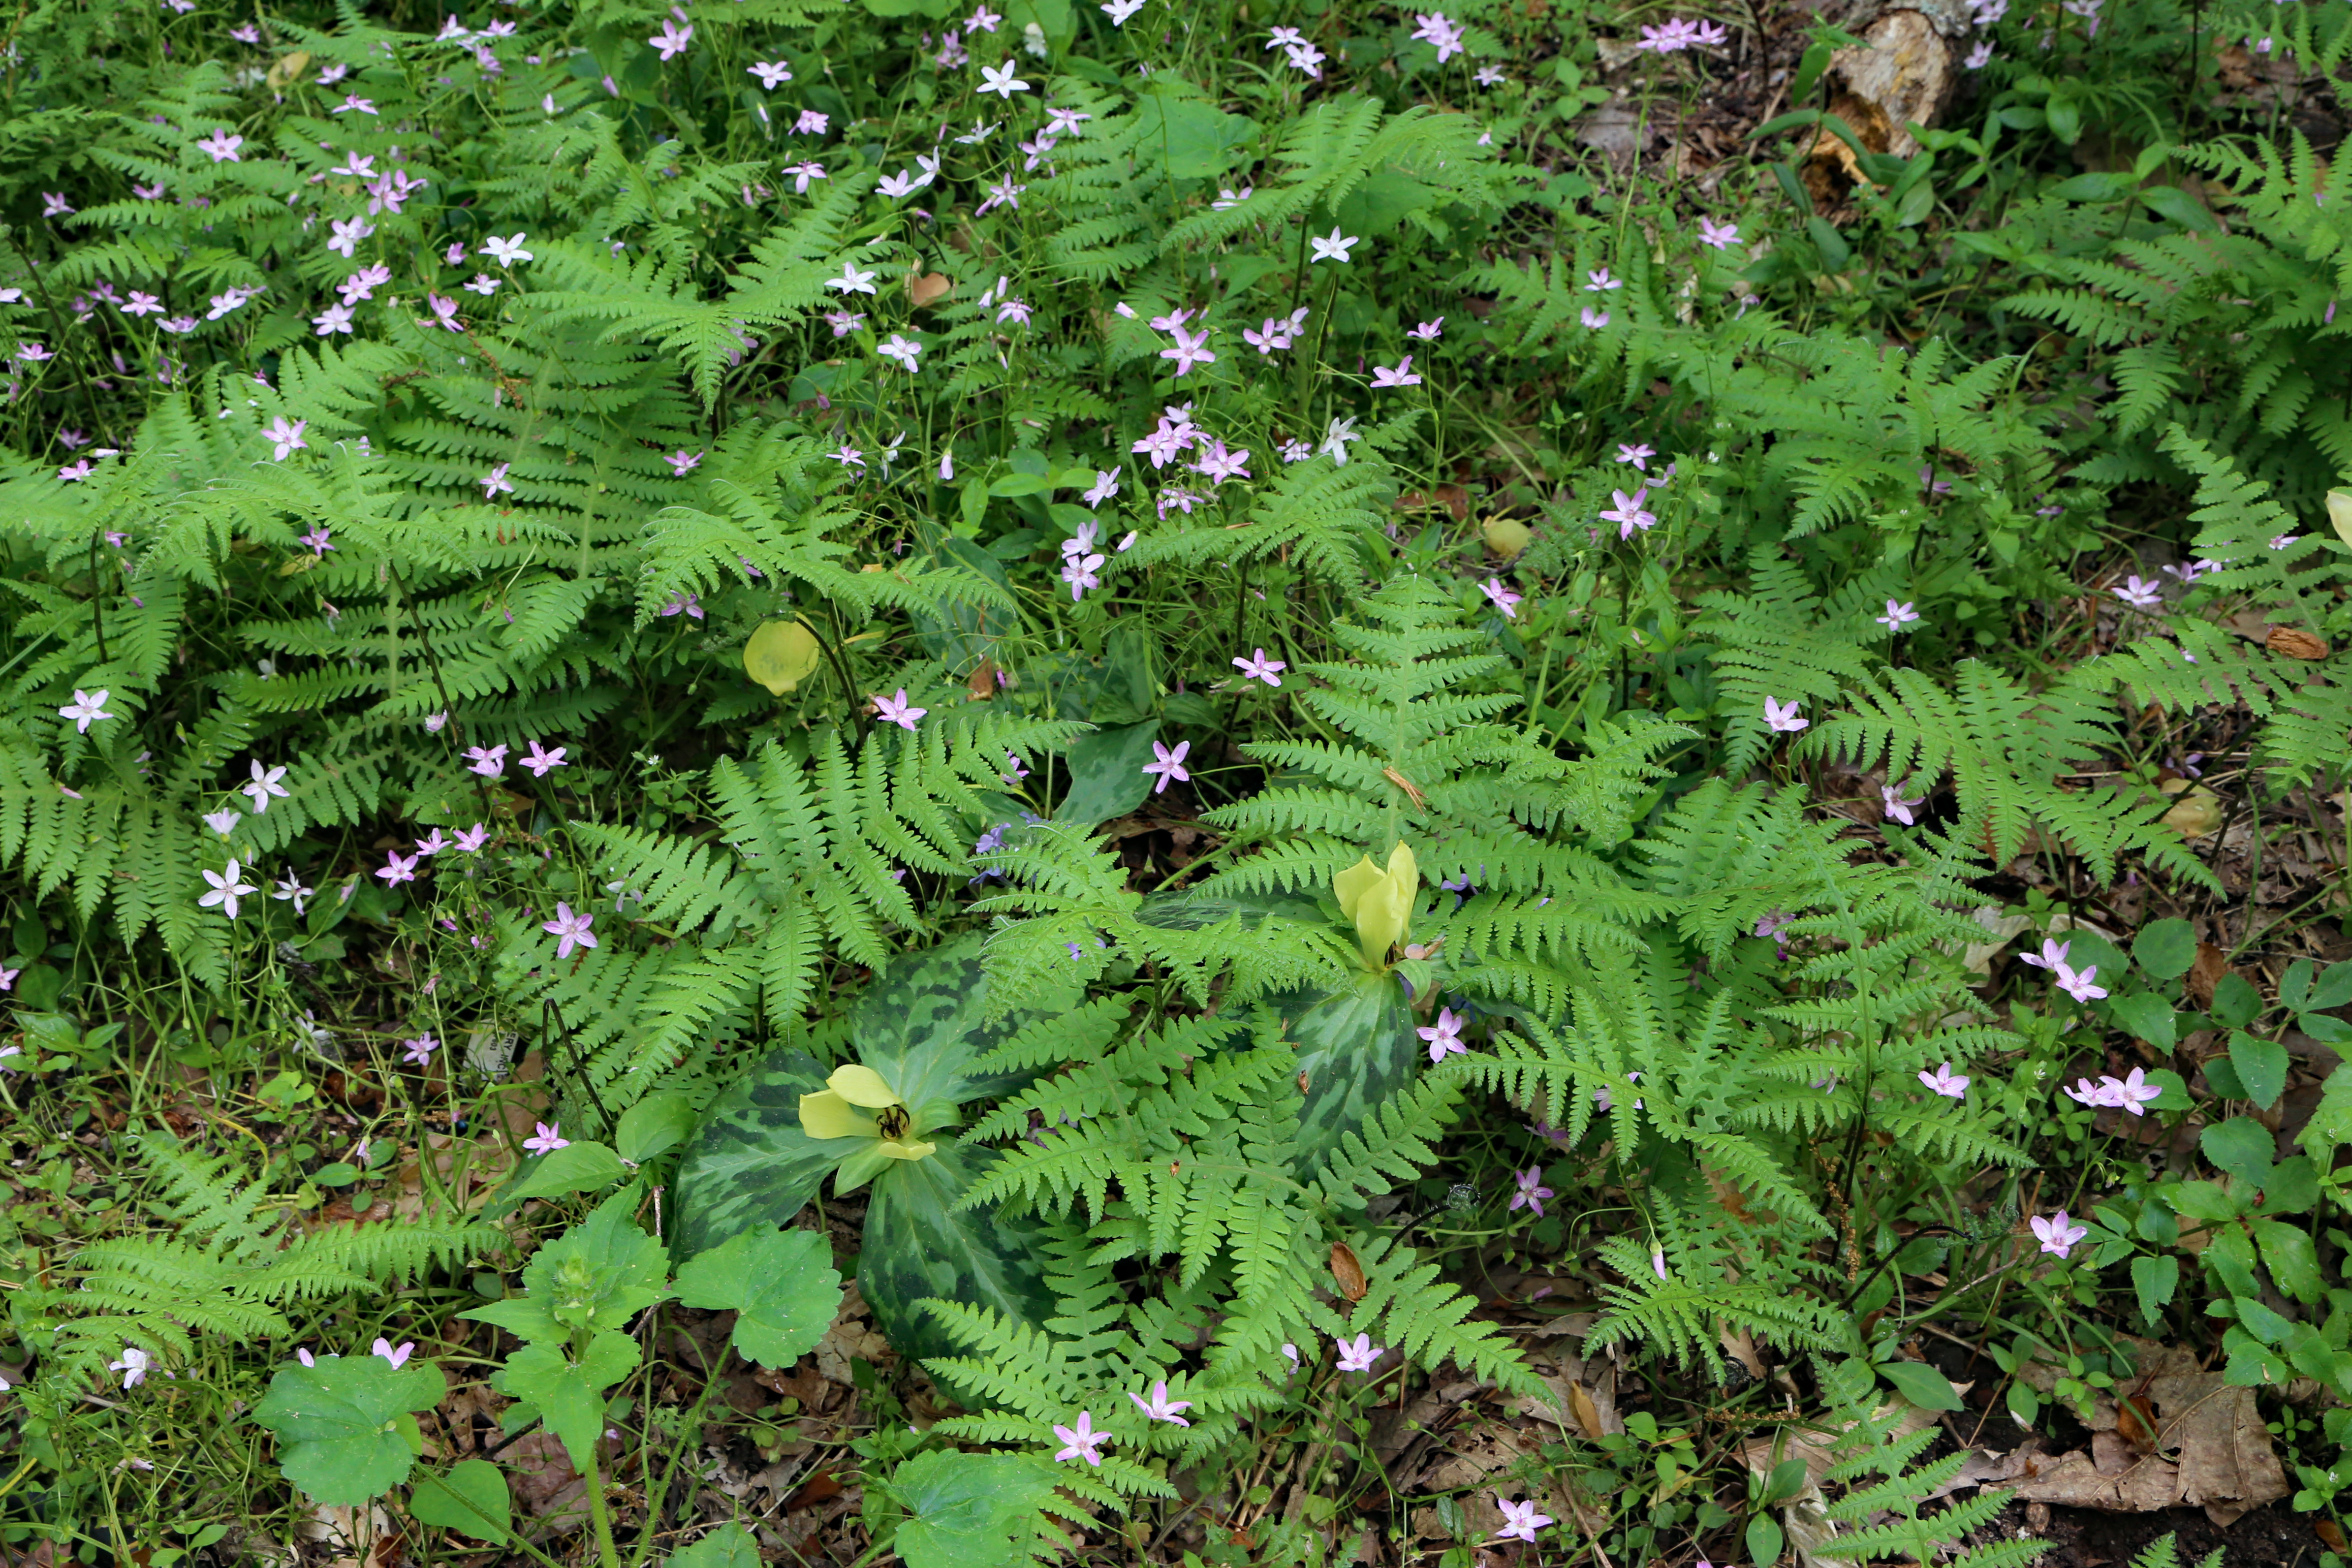 The Scientific Name is Phegopteris hexagonoptera. You will likely hear them called Broad Beech Fern. This picture shows the Broad Beech Fern planted with Trillium luteum and Claytonia caroliniana along the Natural Heritage Trail in the South Carolina Botanical Gardens. of Phegopteris hexagonoptera